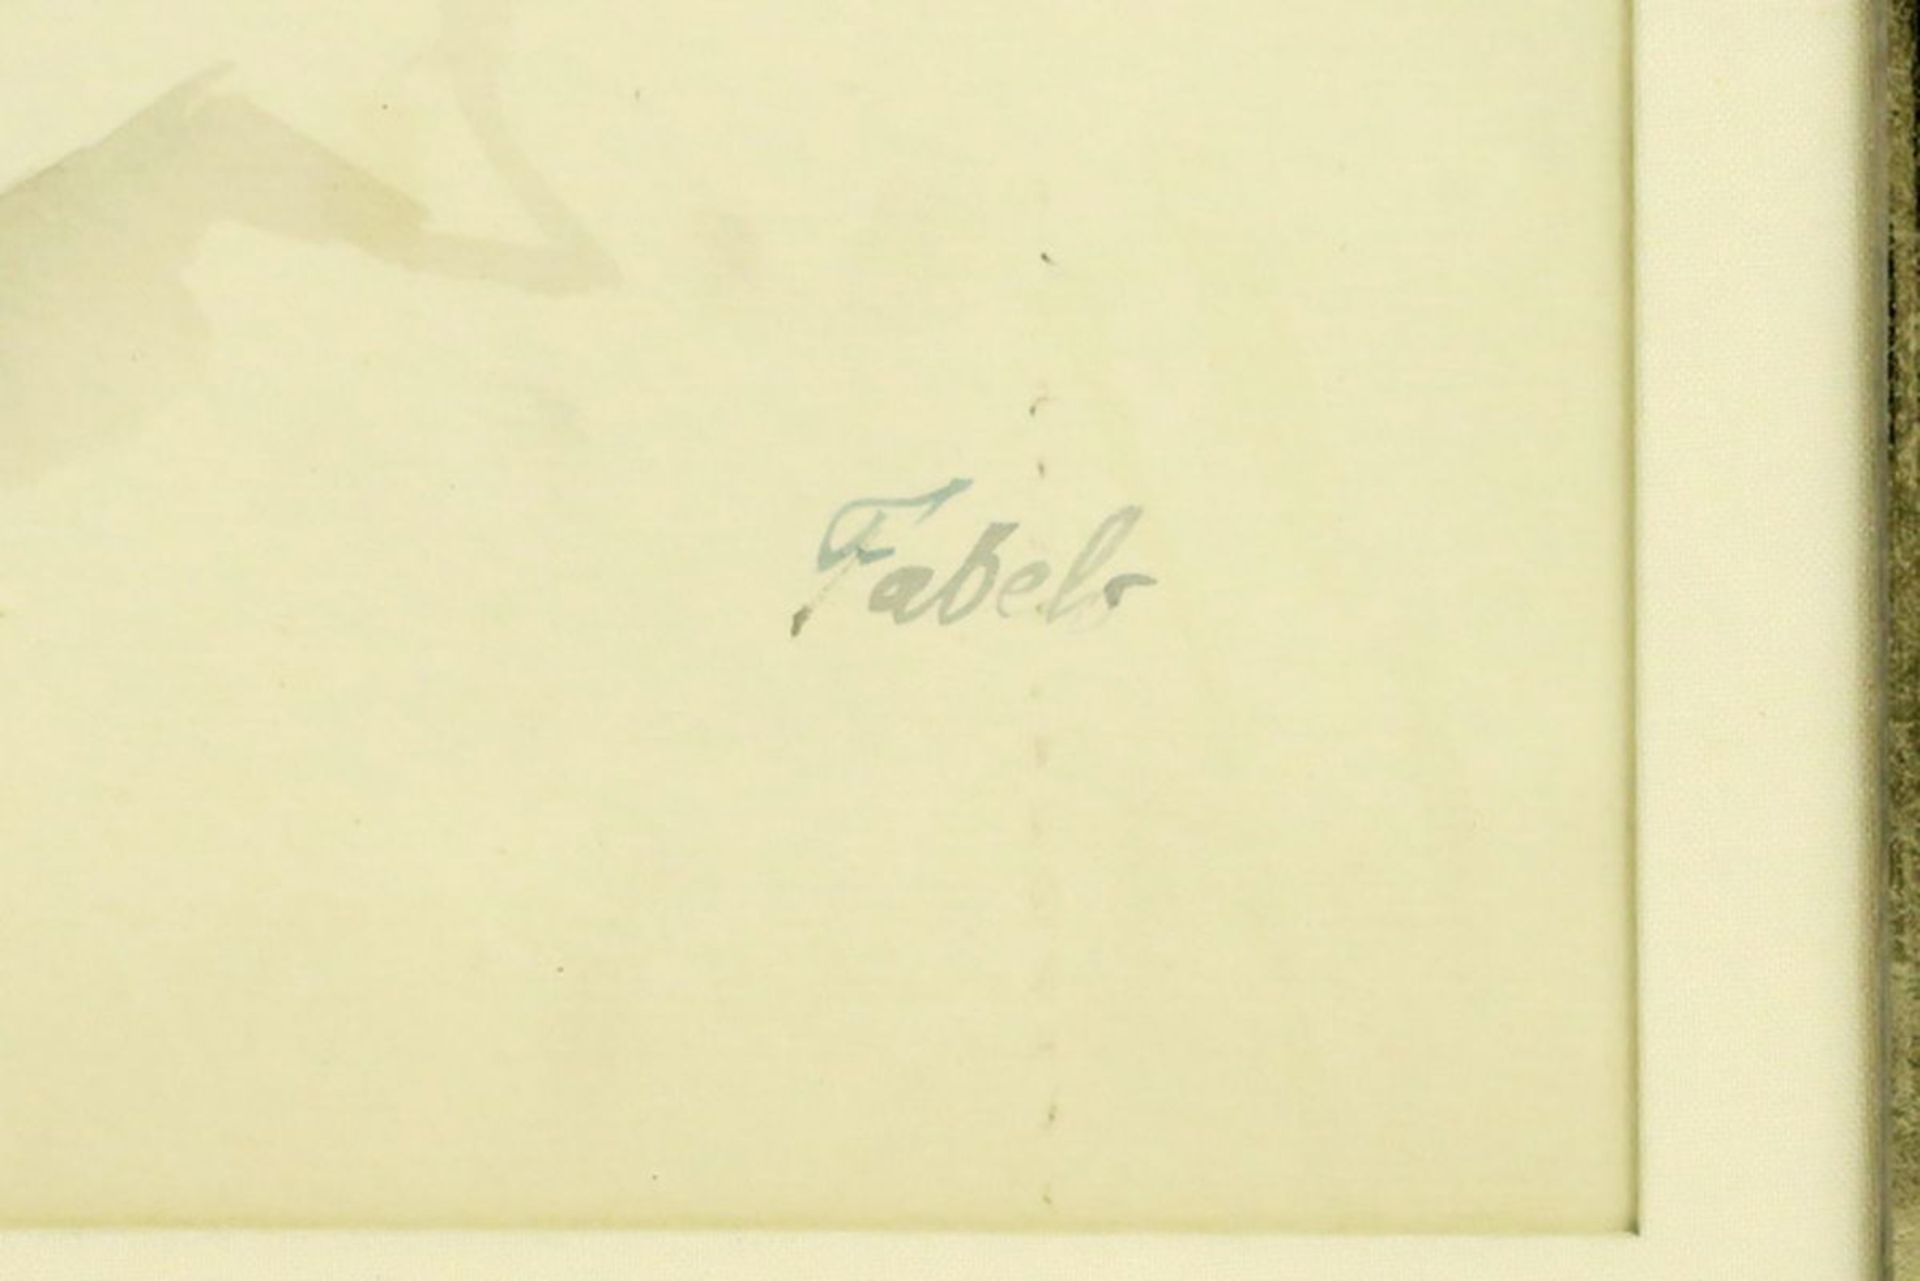 20th Cent. Cuban aquarelle - signed Roberto Favelo - - FAVELO ROBERTO (° 1950) [...] - Image 3 of 3